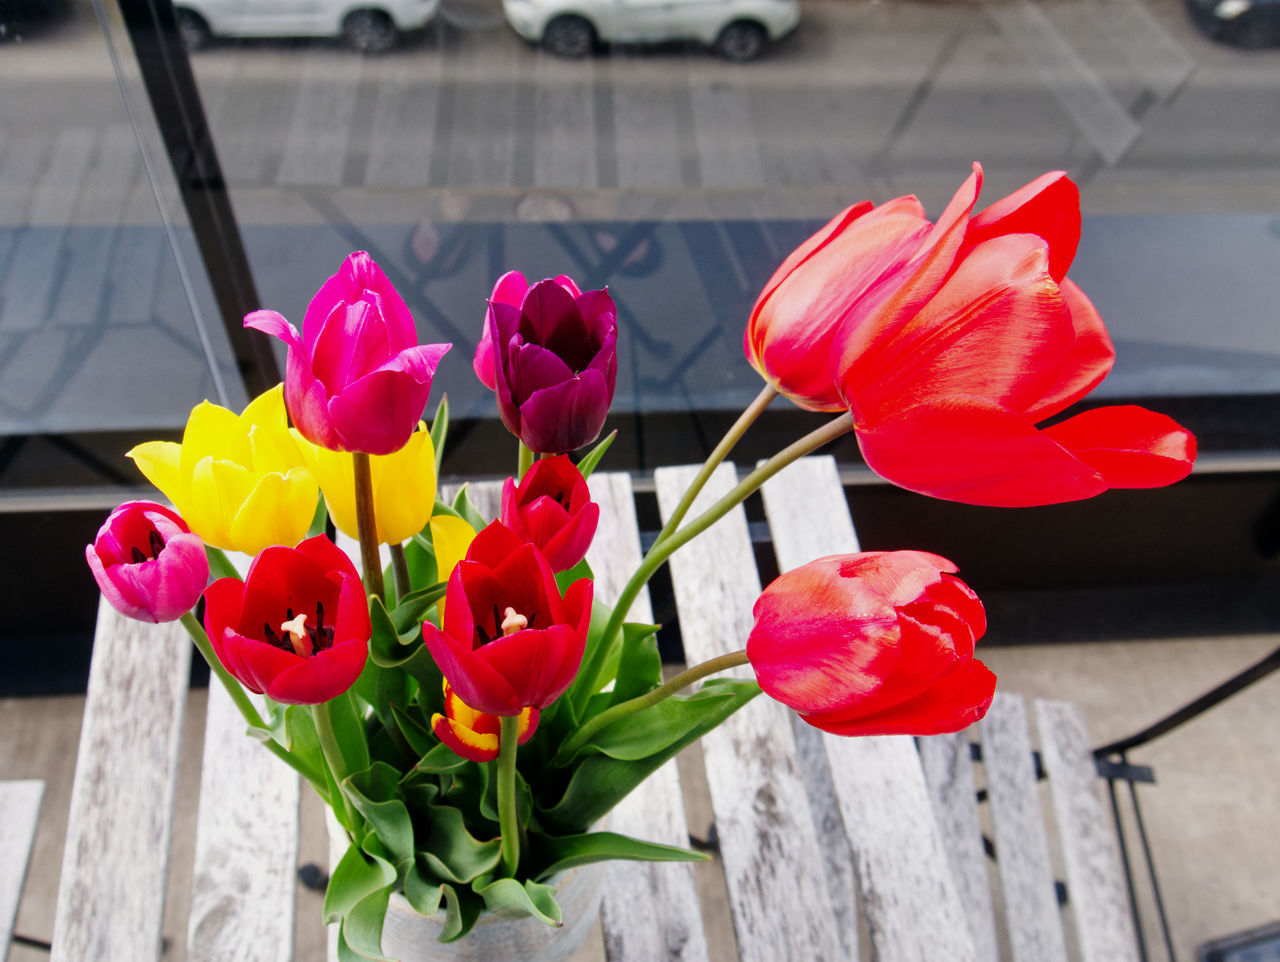 CLOSE-UP OF RED TULIPS IN FLOWER POT